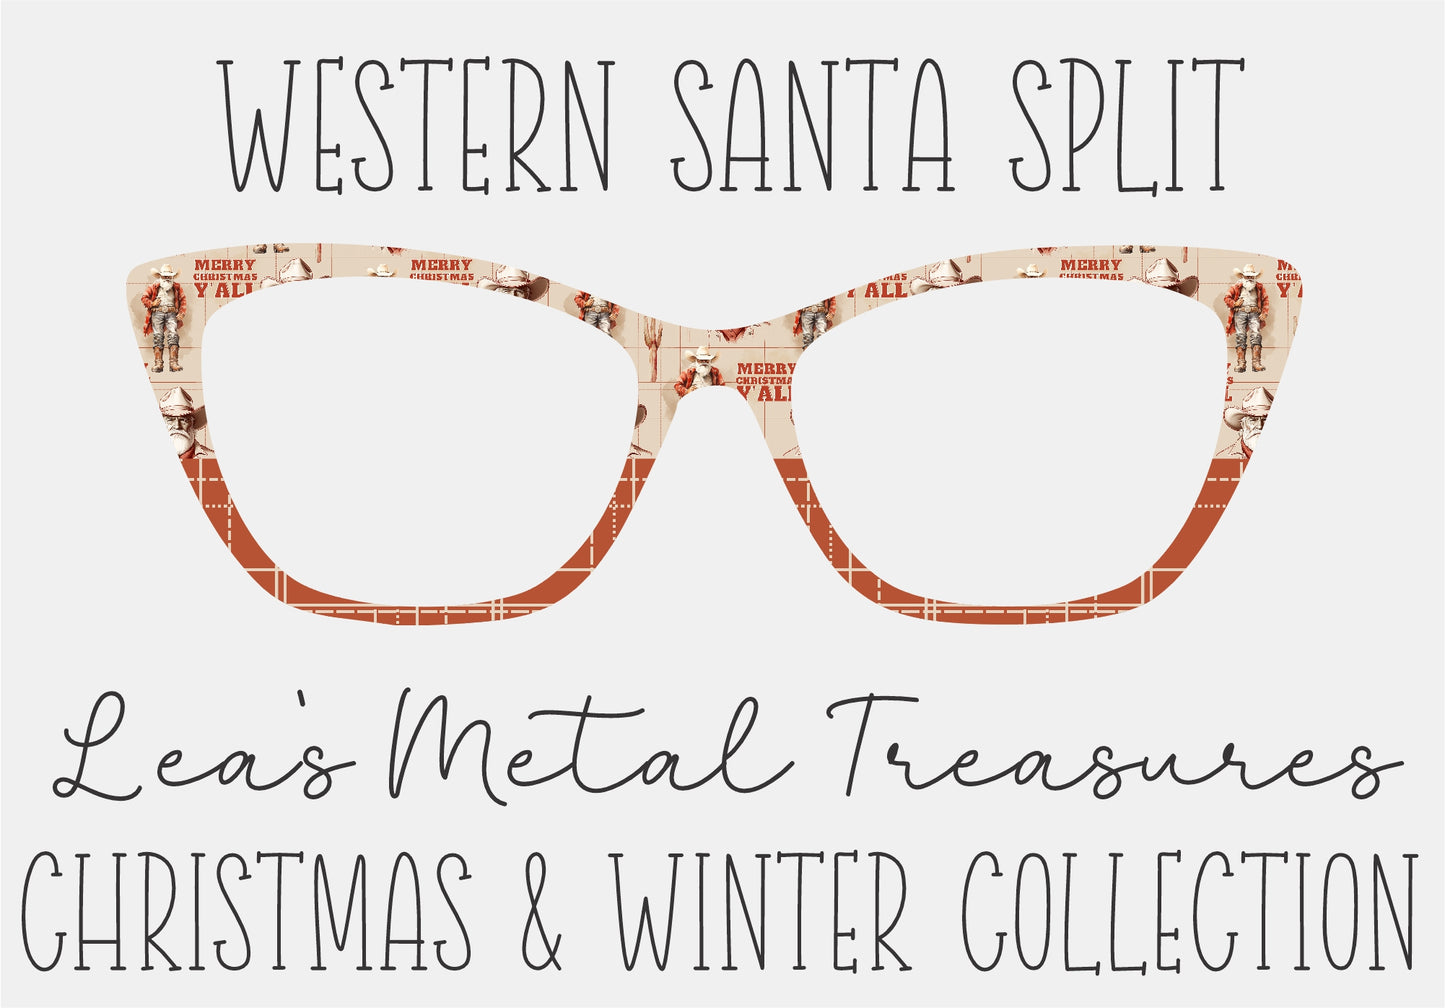 WESTERN SANTA SPLIT Eyewear Frame Toppers COMES WITH MAGNETS